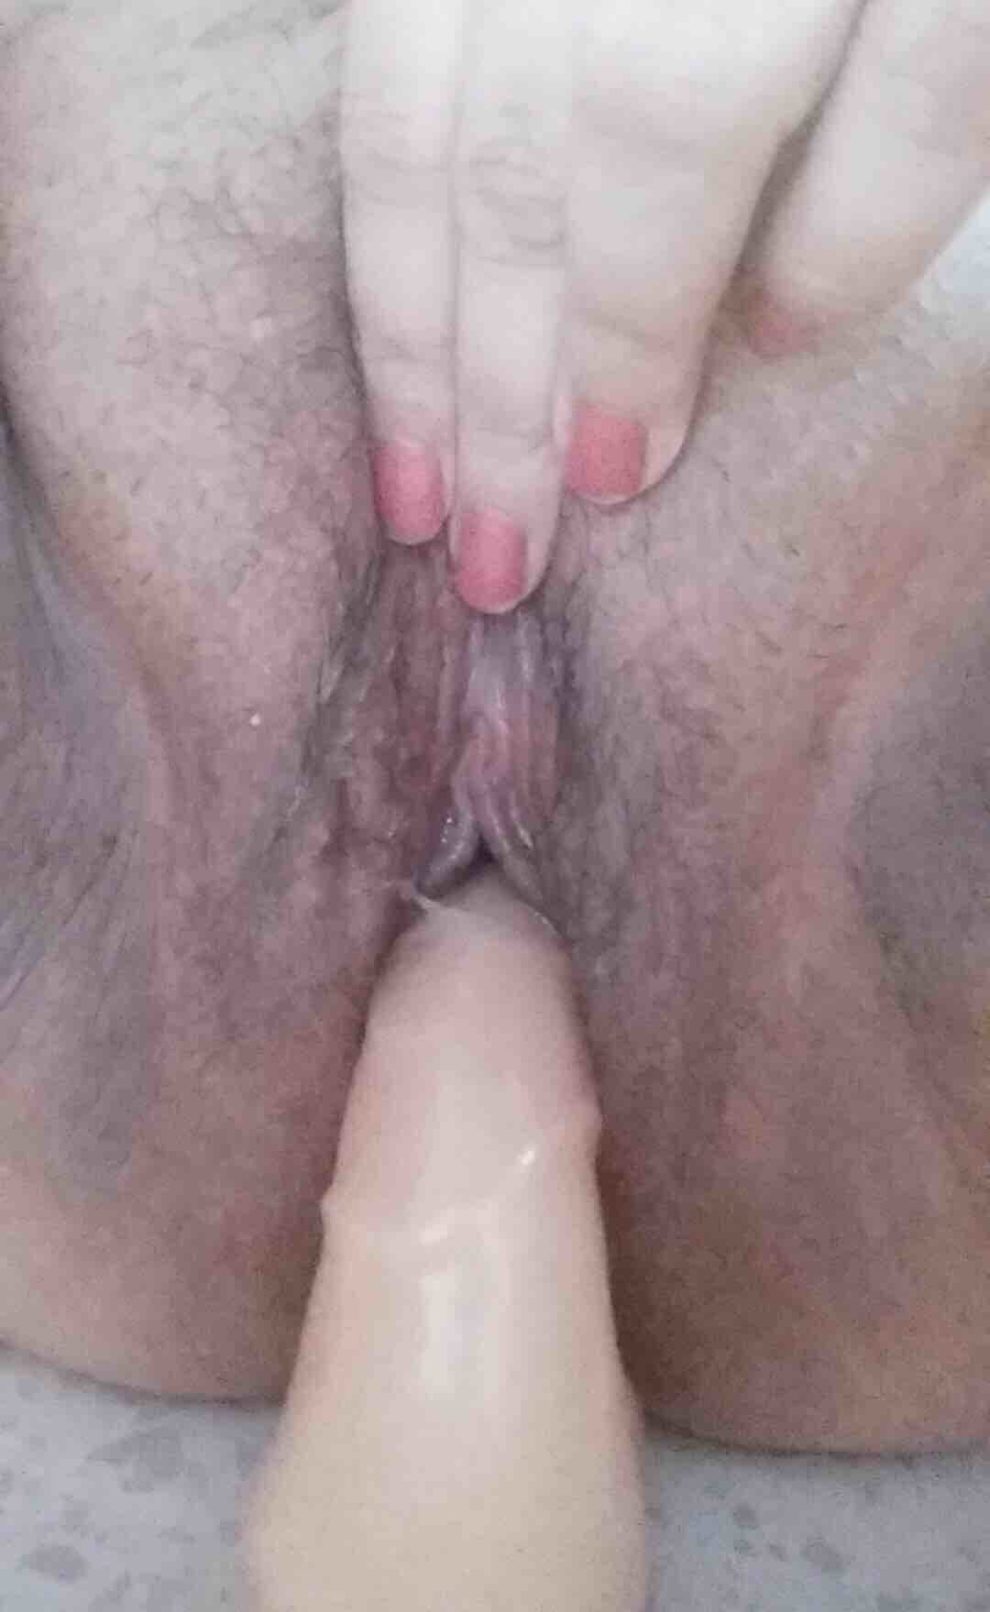 Let her know what you would do to it.